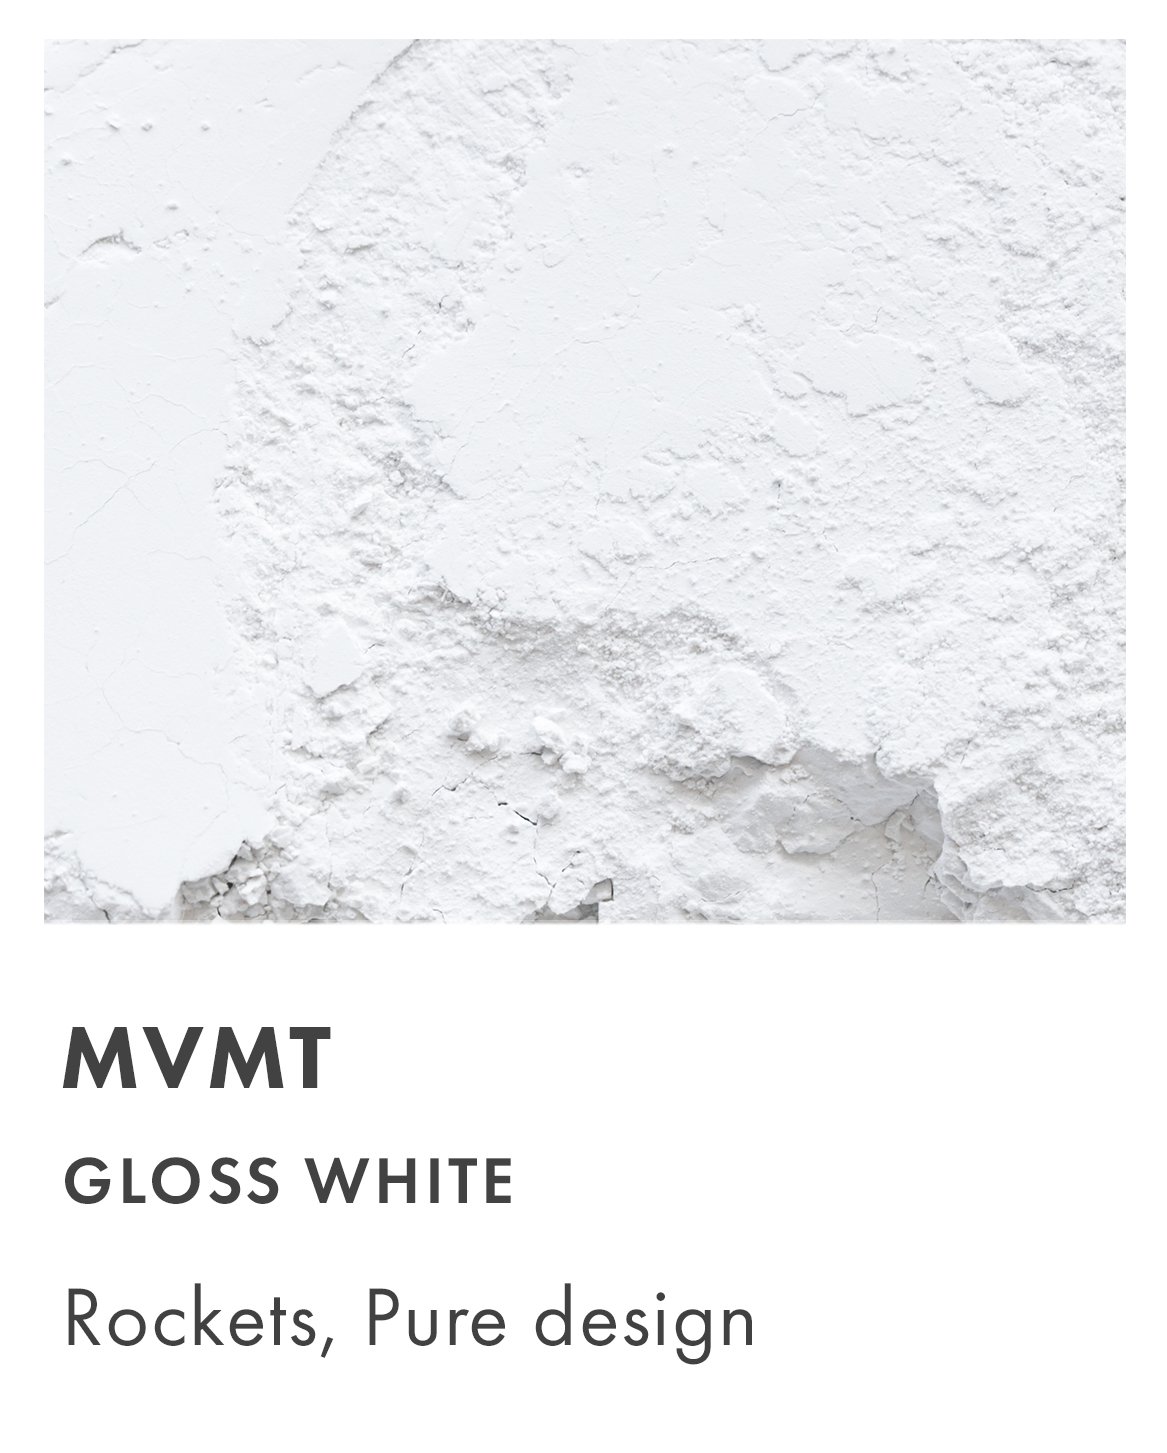 MVMT ceramic swatch in color gloss white